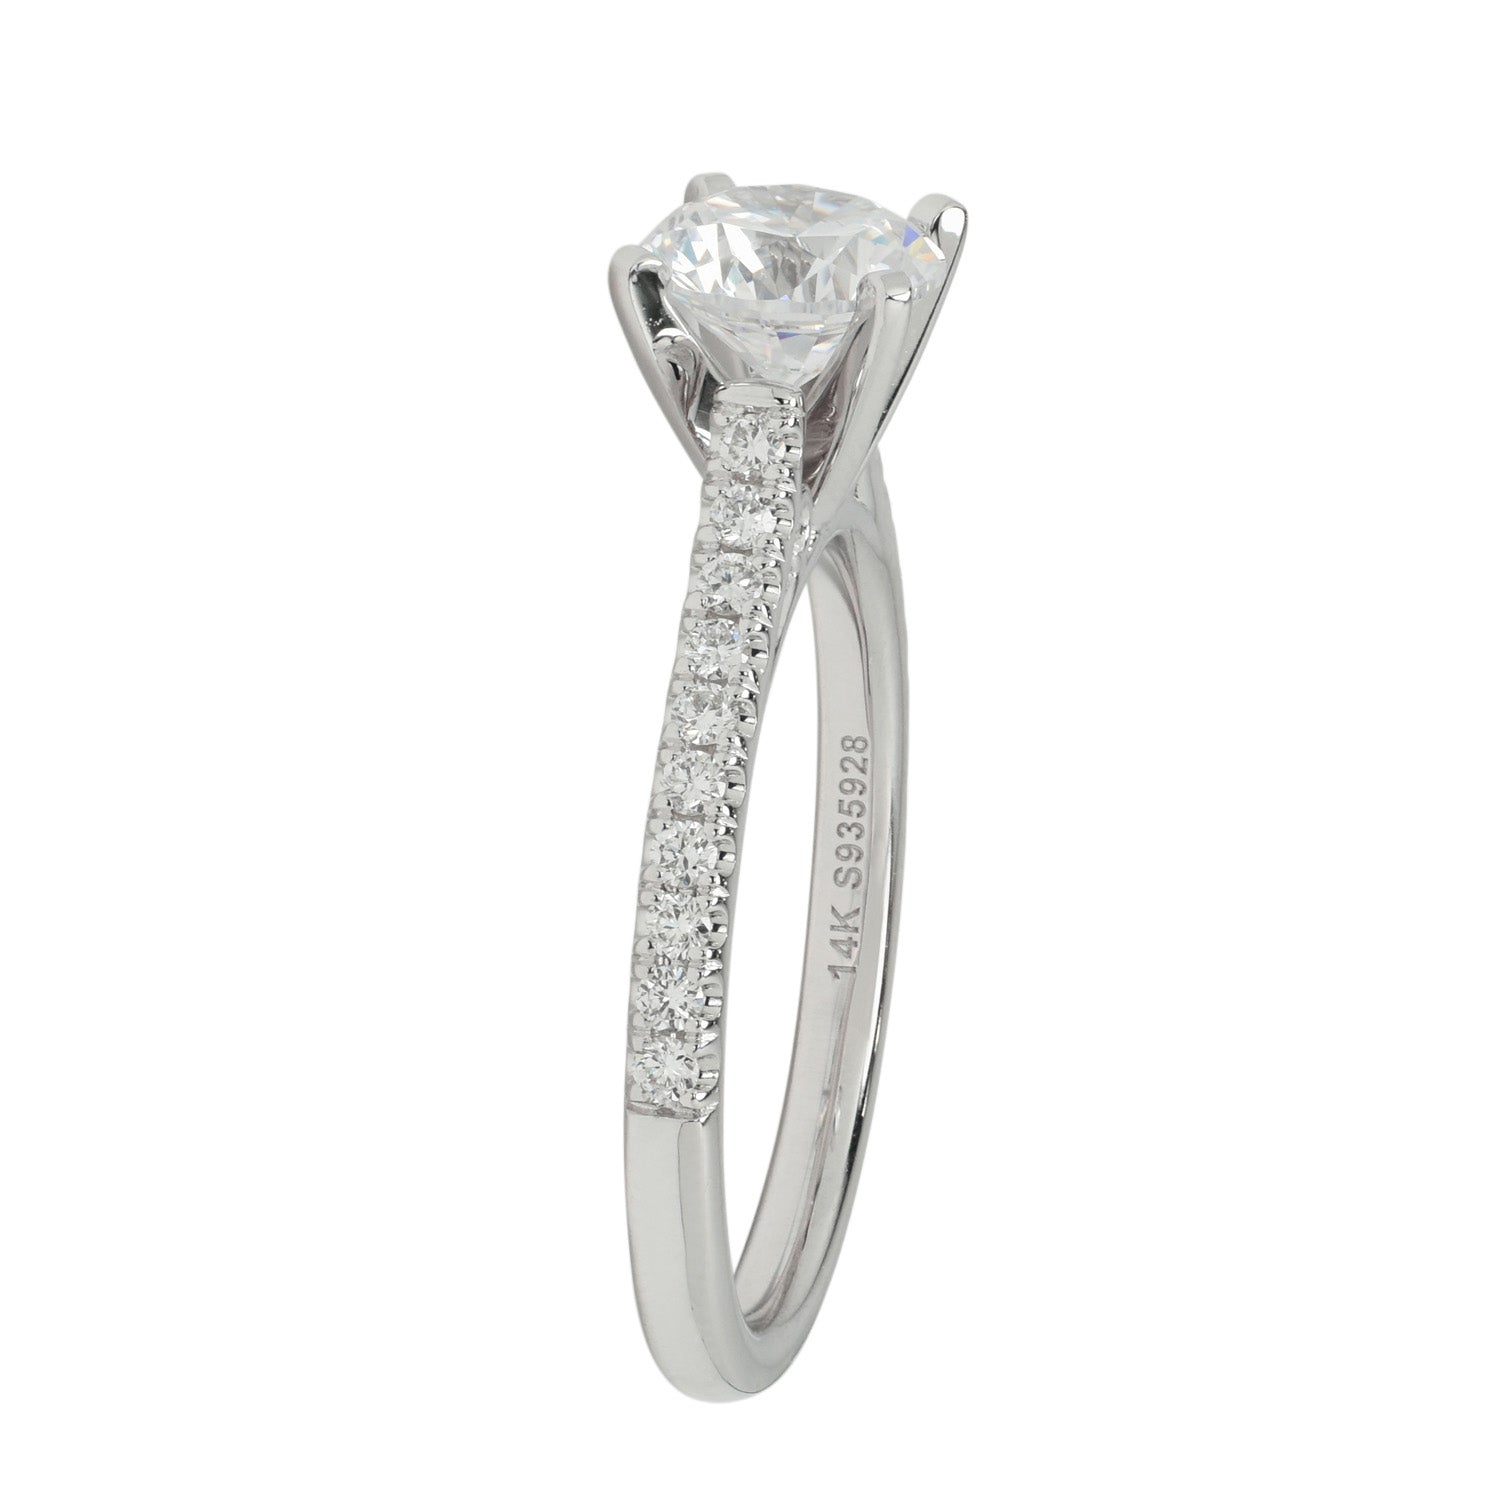 Gabriel Joanna Diamond Engagement Ring Setting in 14kt White Gold (1/4ct tw)